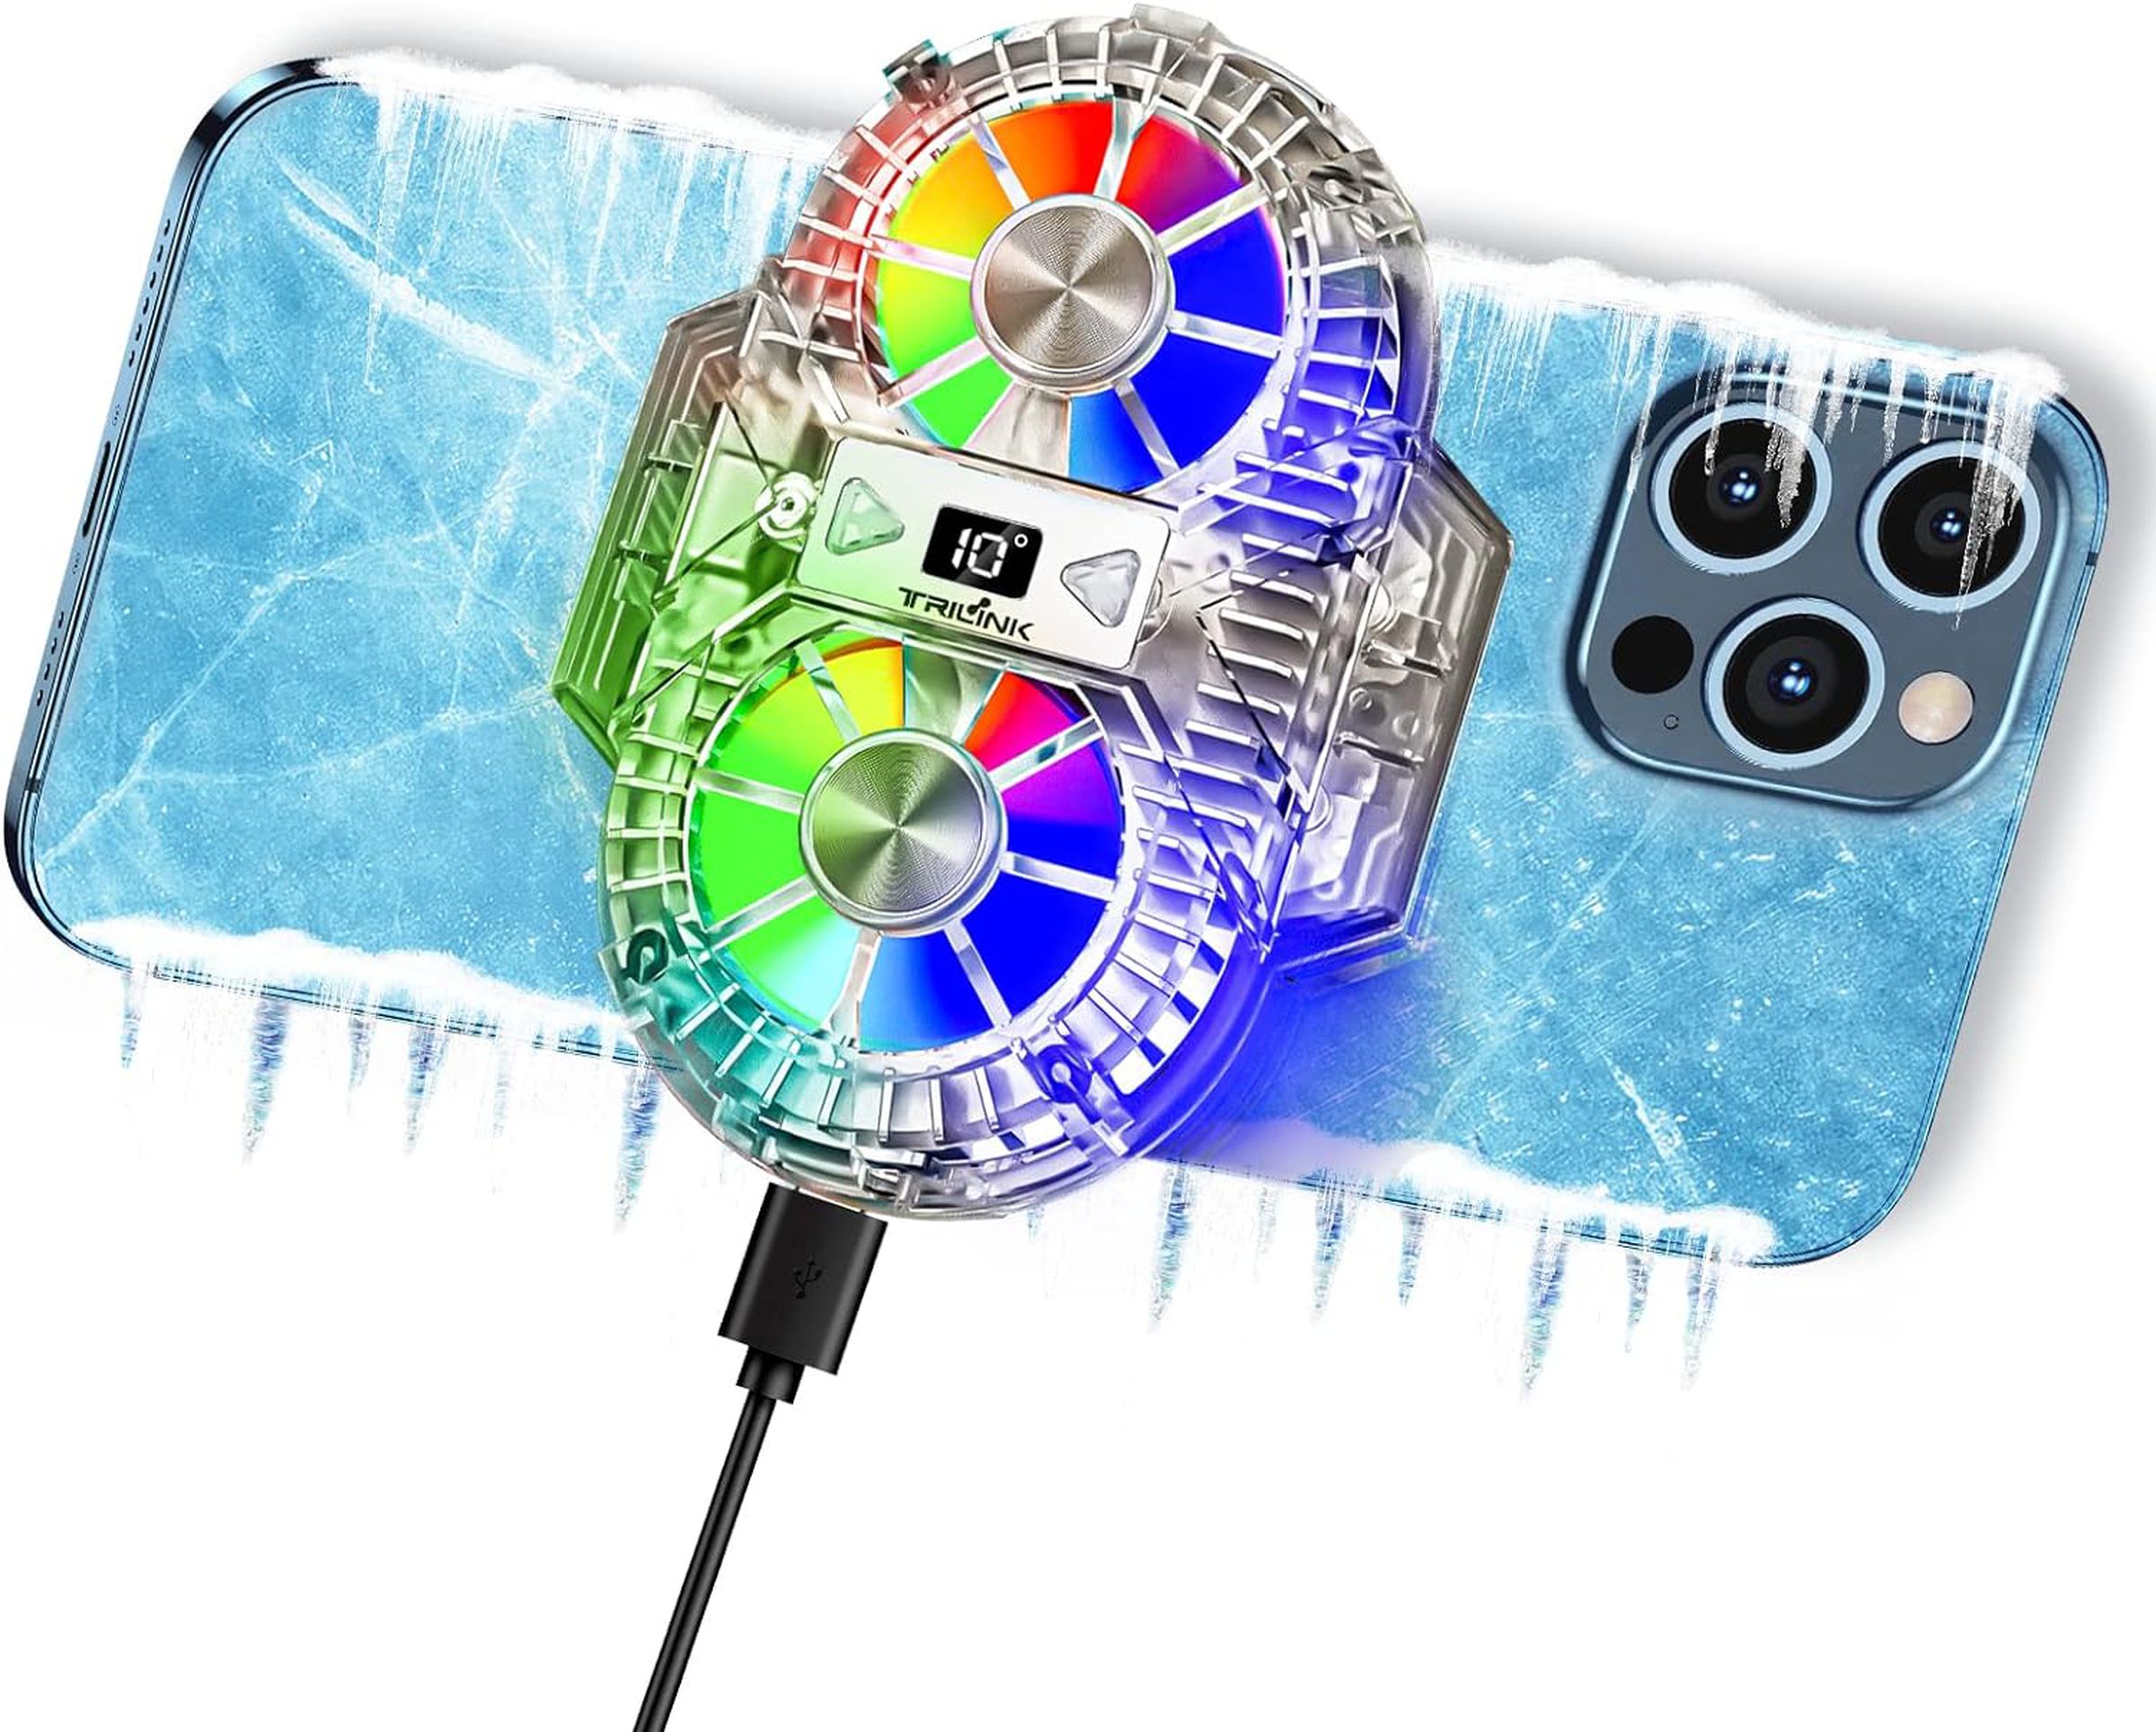 A phone covered in snow with white icicles. A very RGB dual-rotor fan is stuck to the back.